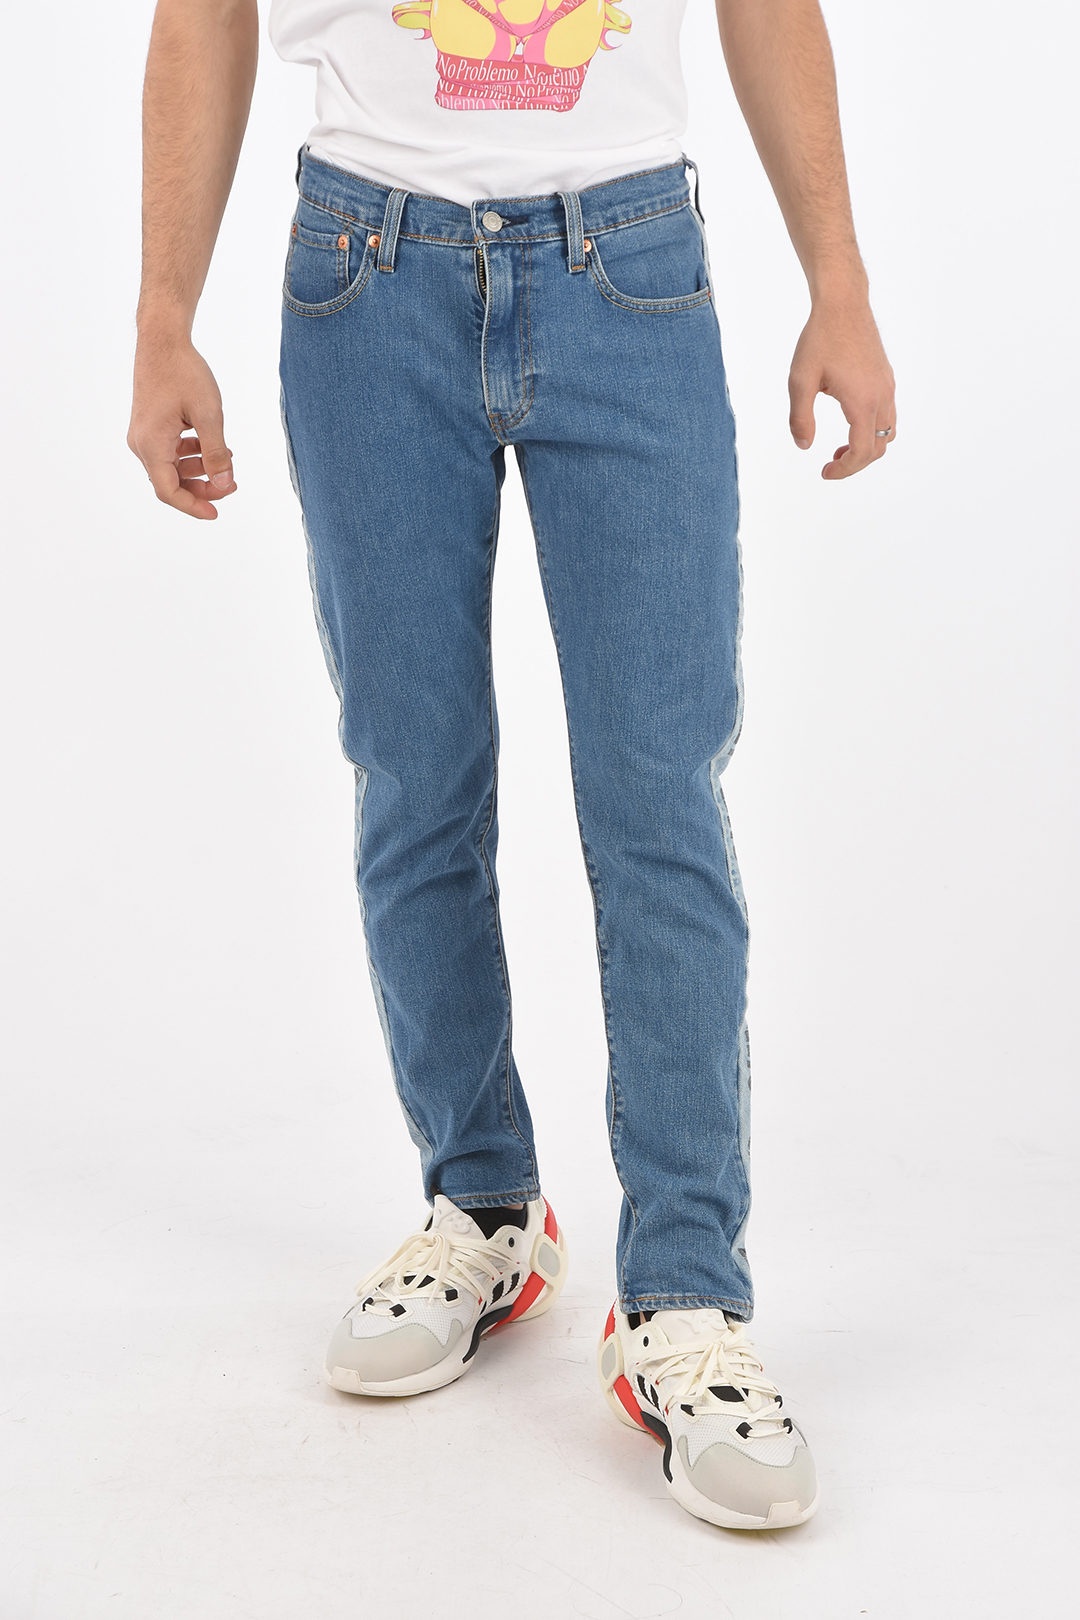 Levi's Cropped Tapered Jeans HI-BALL ROLL Medium Wash men - Glamood Outlet